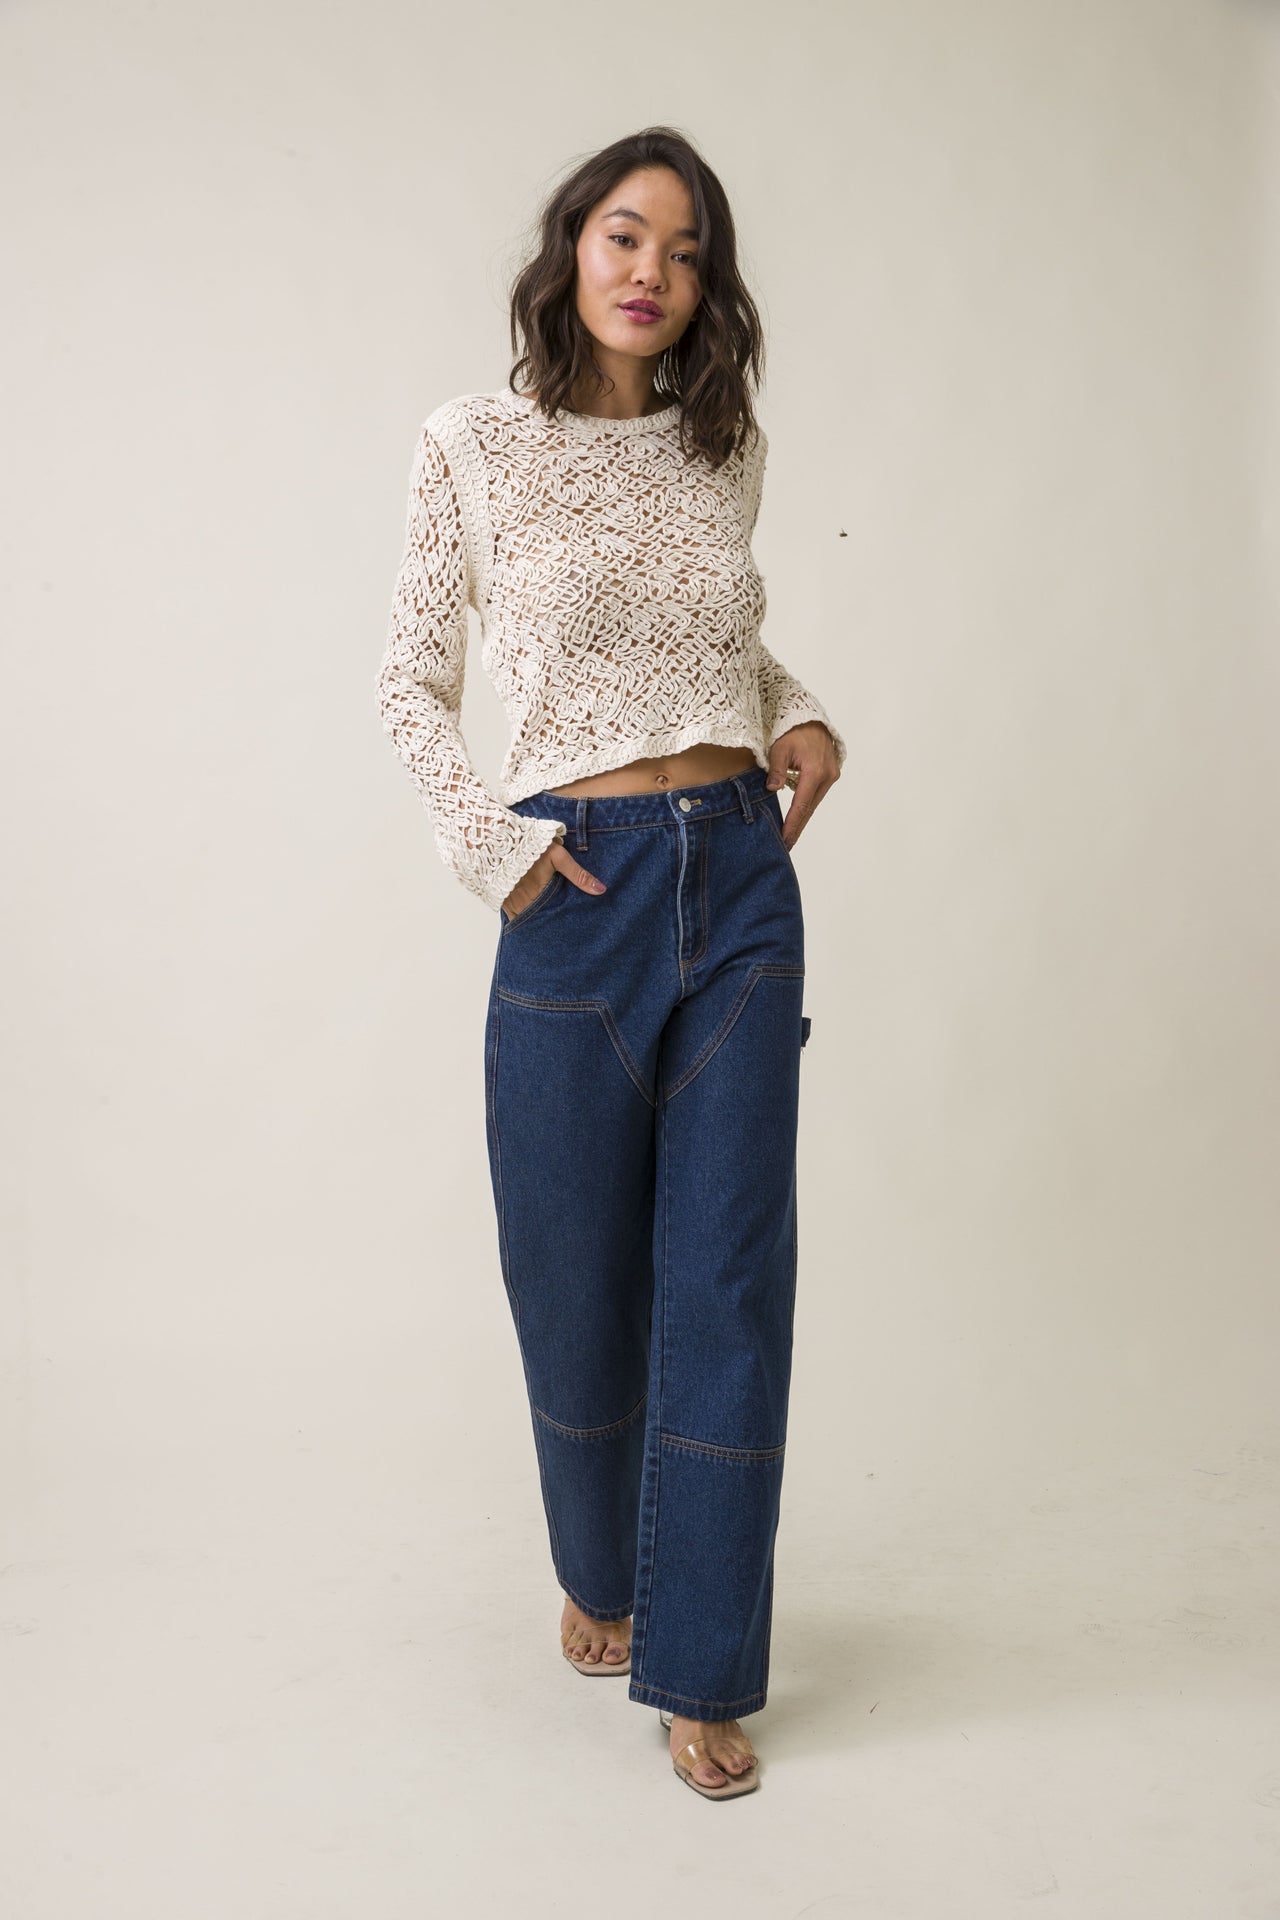 Klara Net Crew, Sweater by Line and Dot | LIT Boutique